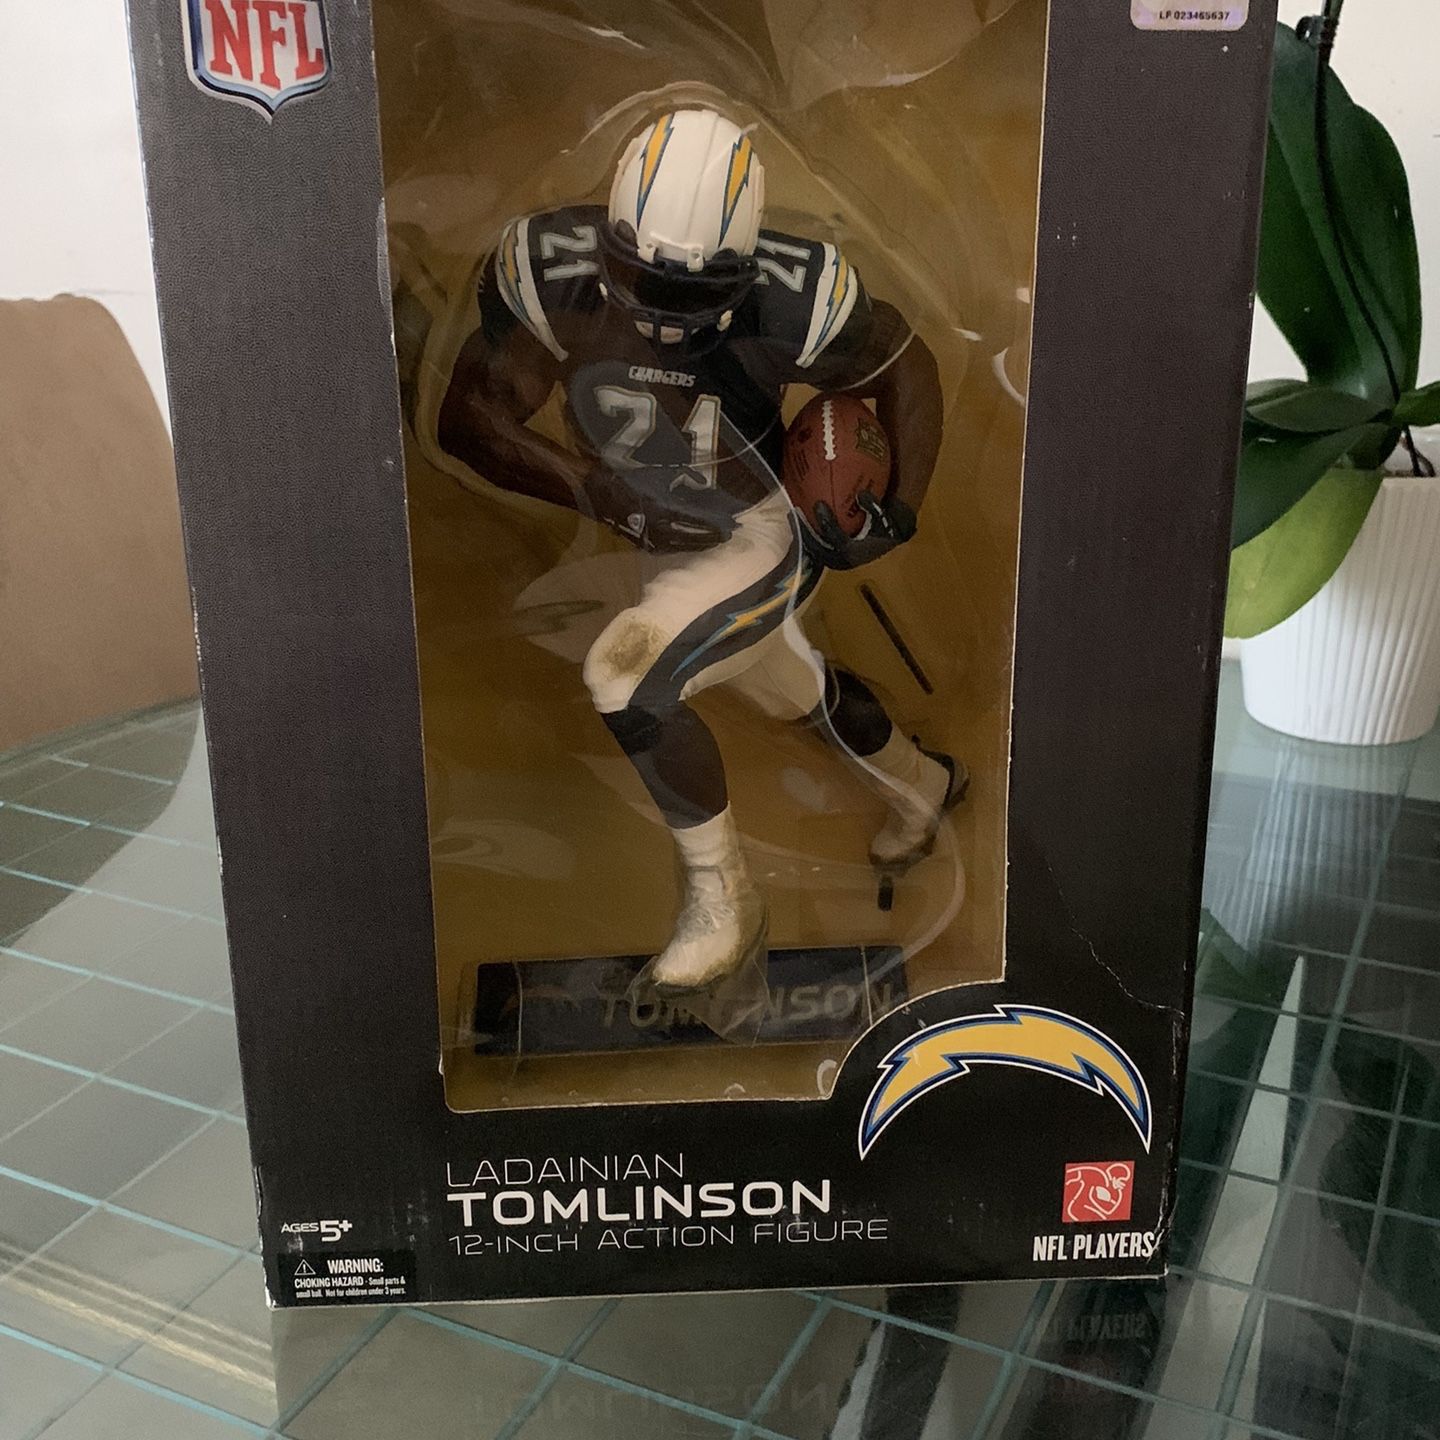 McFarlane NFL Series 5 action figure features LaDainian Tomlinson of the San Diego Chargers